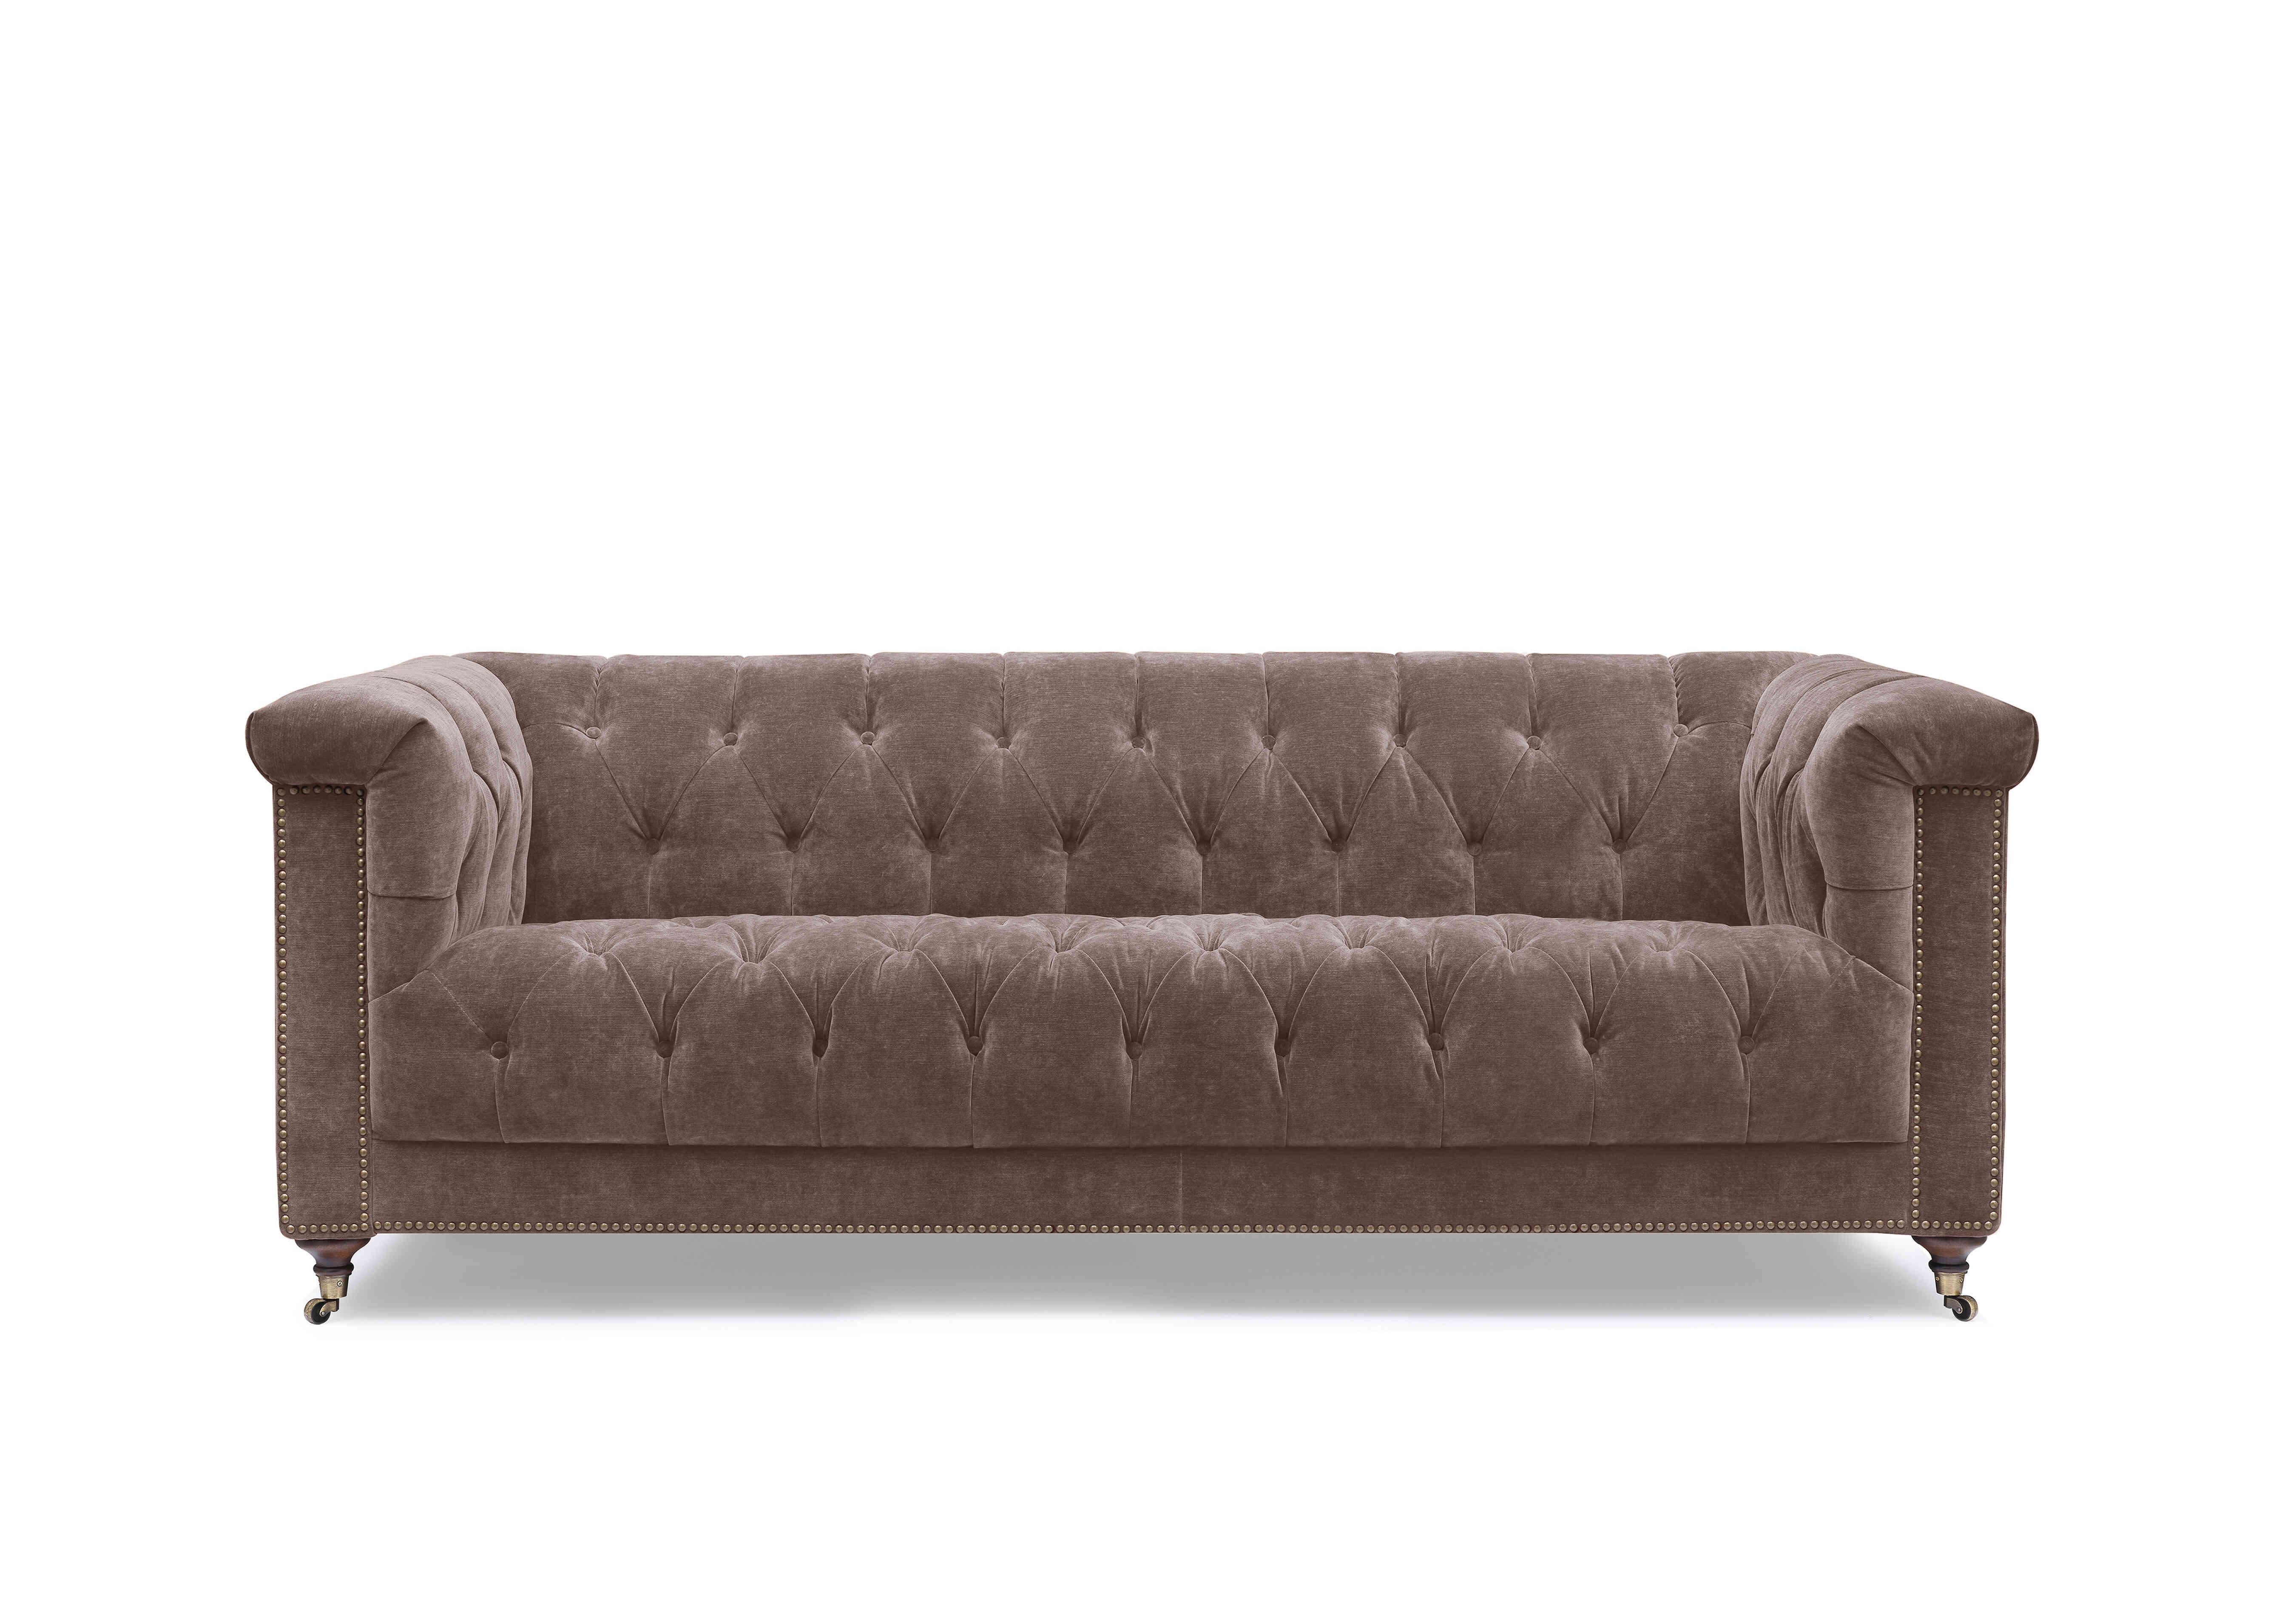 Wallace 3 Seater Fabric Chesterfield Sofa with USB-C in X3y1-W023 Antler on Furniture Village